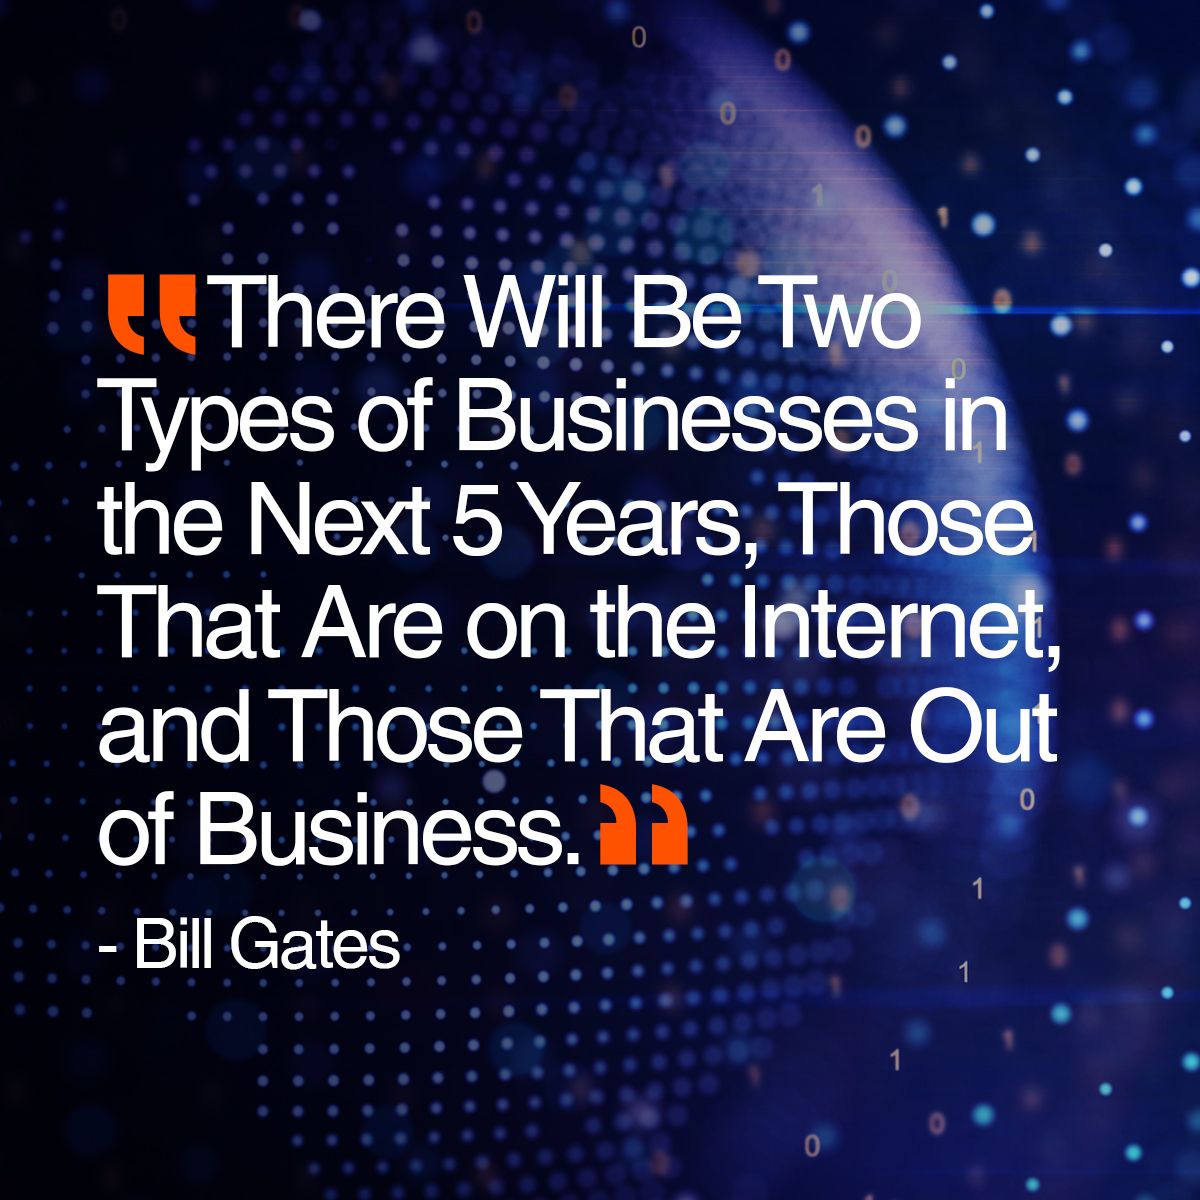 There will be two types of businesses in the next 5 years, those that are on the Internet, and those that are out of business.-Bill Gates